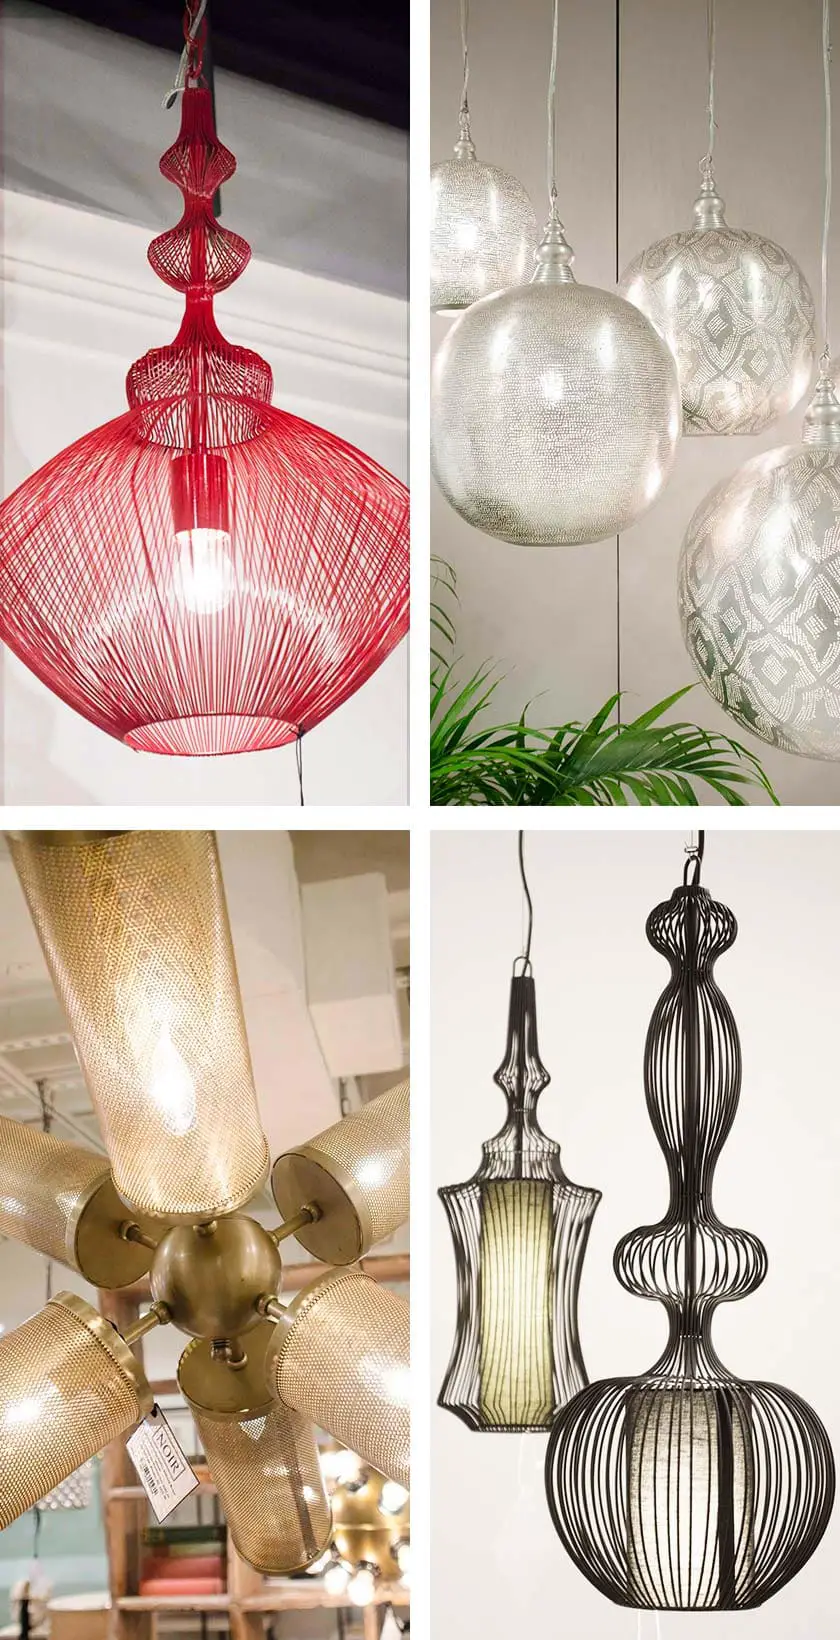 Pierced lighting design trend from AmericasMart on Thou Swell @thouswellblog